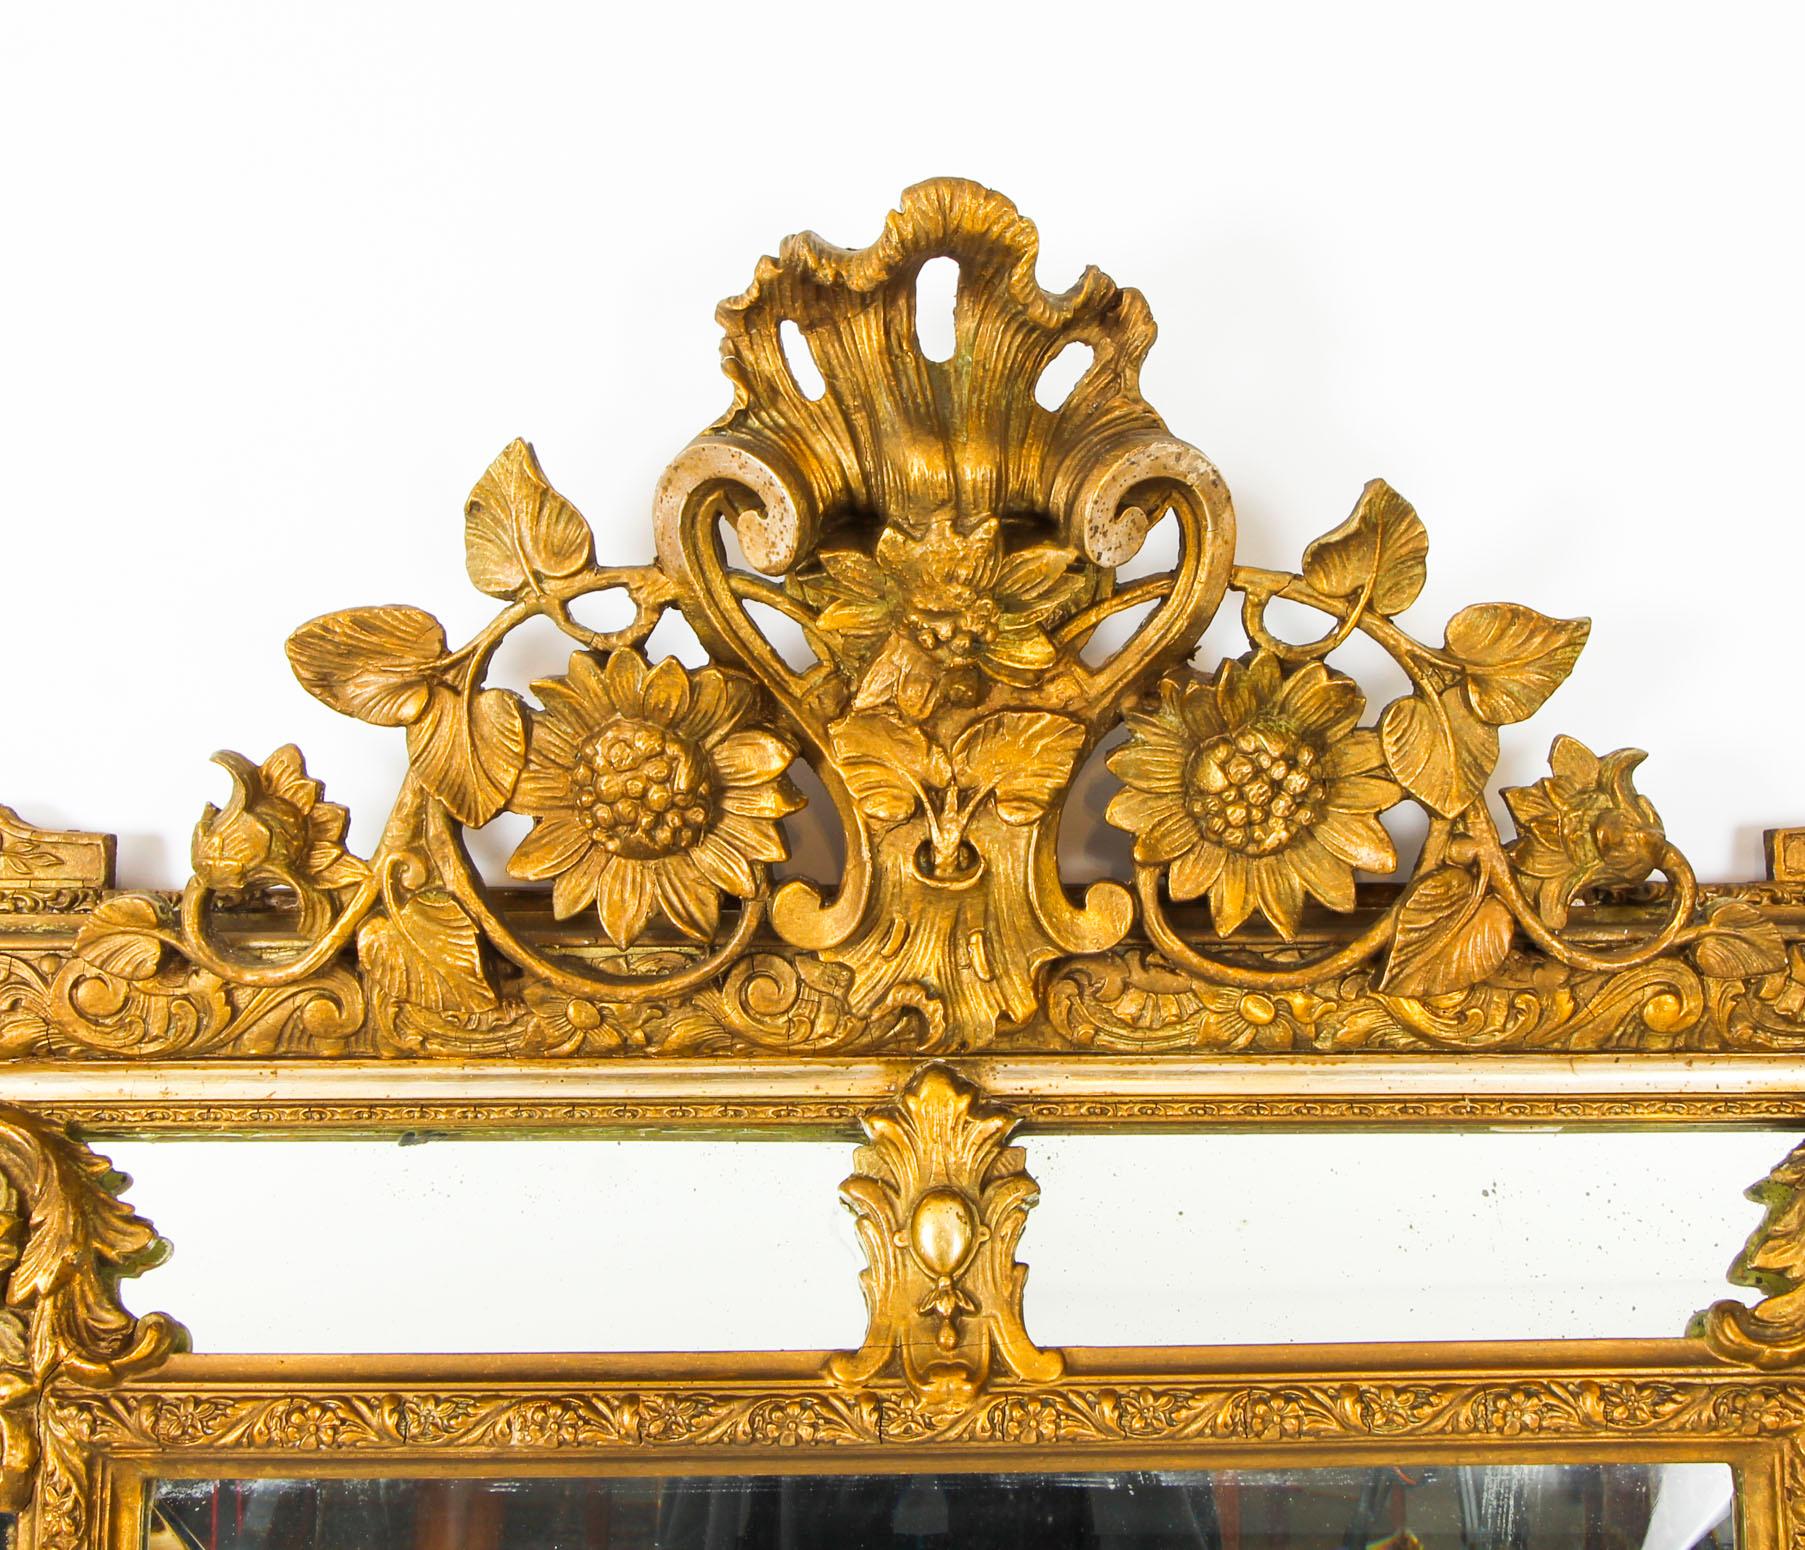 This is a magnificent antique French Louis Revival giltwood overmantle mirror, circa 1860 in date.

The bevelled rectangular mirror plate is framed with marginal side plates. It has a profusely carved giltwood frame decorated with acanthus leaves